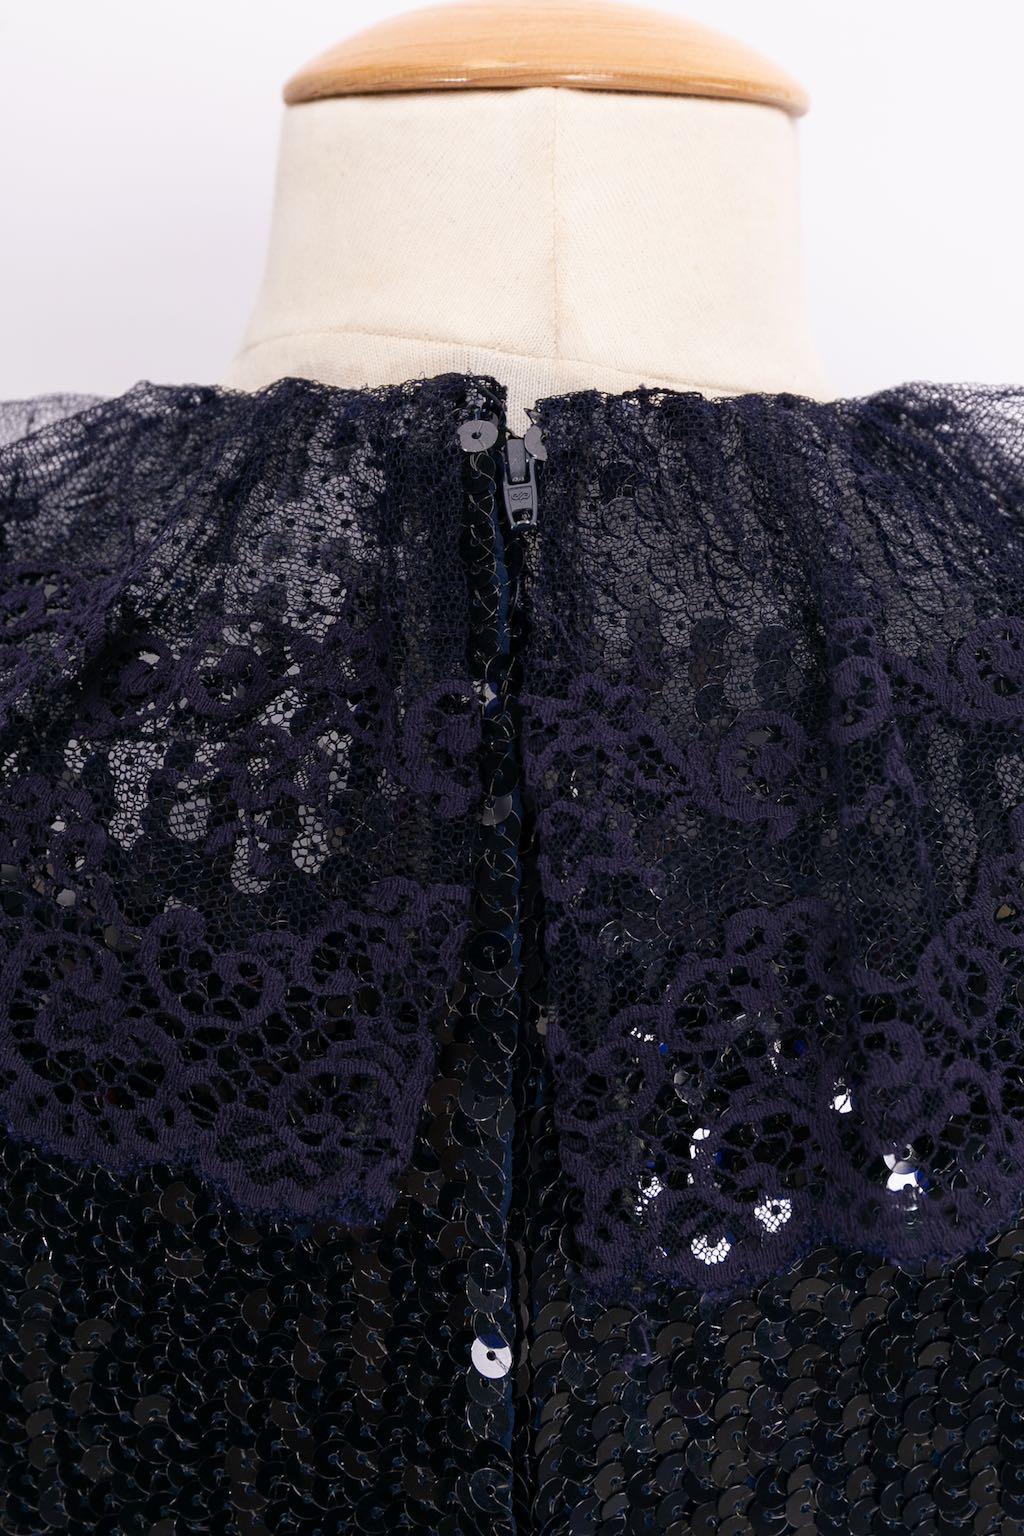 Chanel Embroidered Sequins Crepe Silk Dress, Fall 1994 2